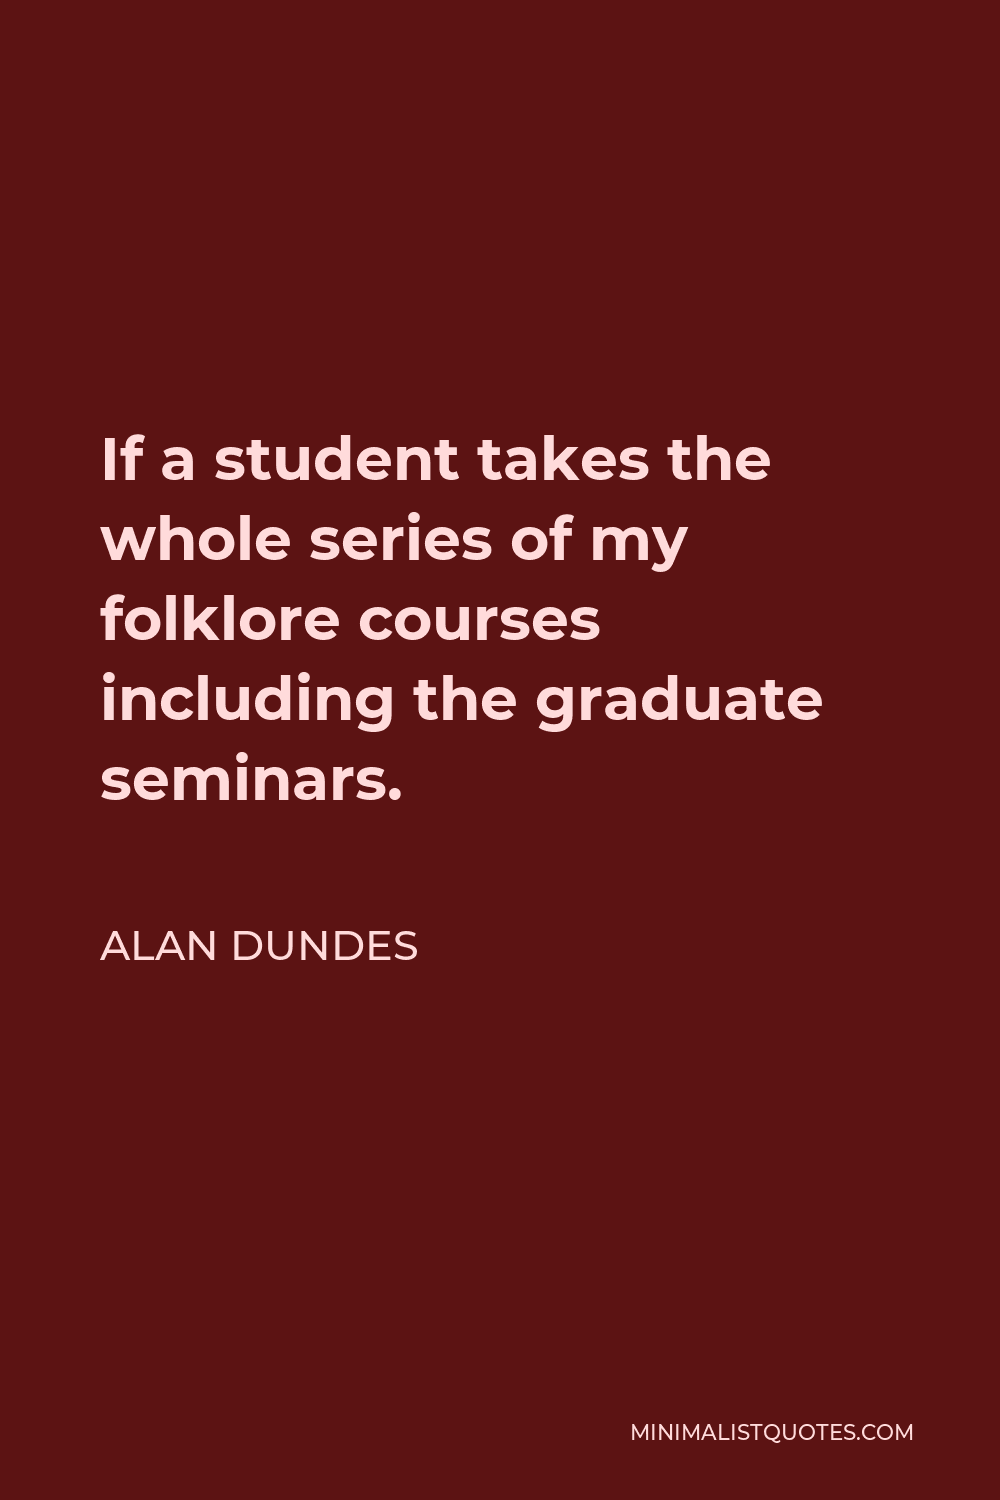 Alan Dundes Quote - If a student takes the whole series of my folklore courses including the graduate seminars.